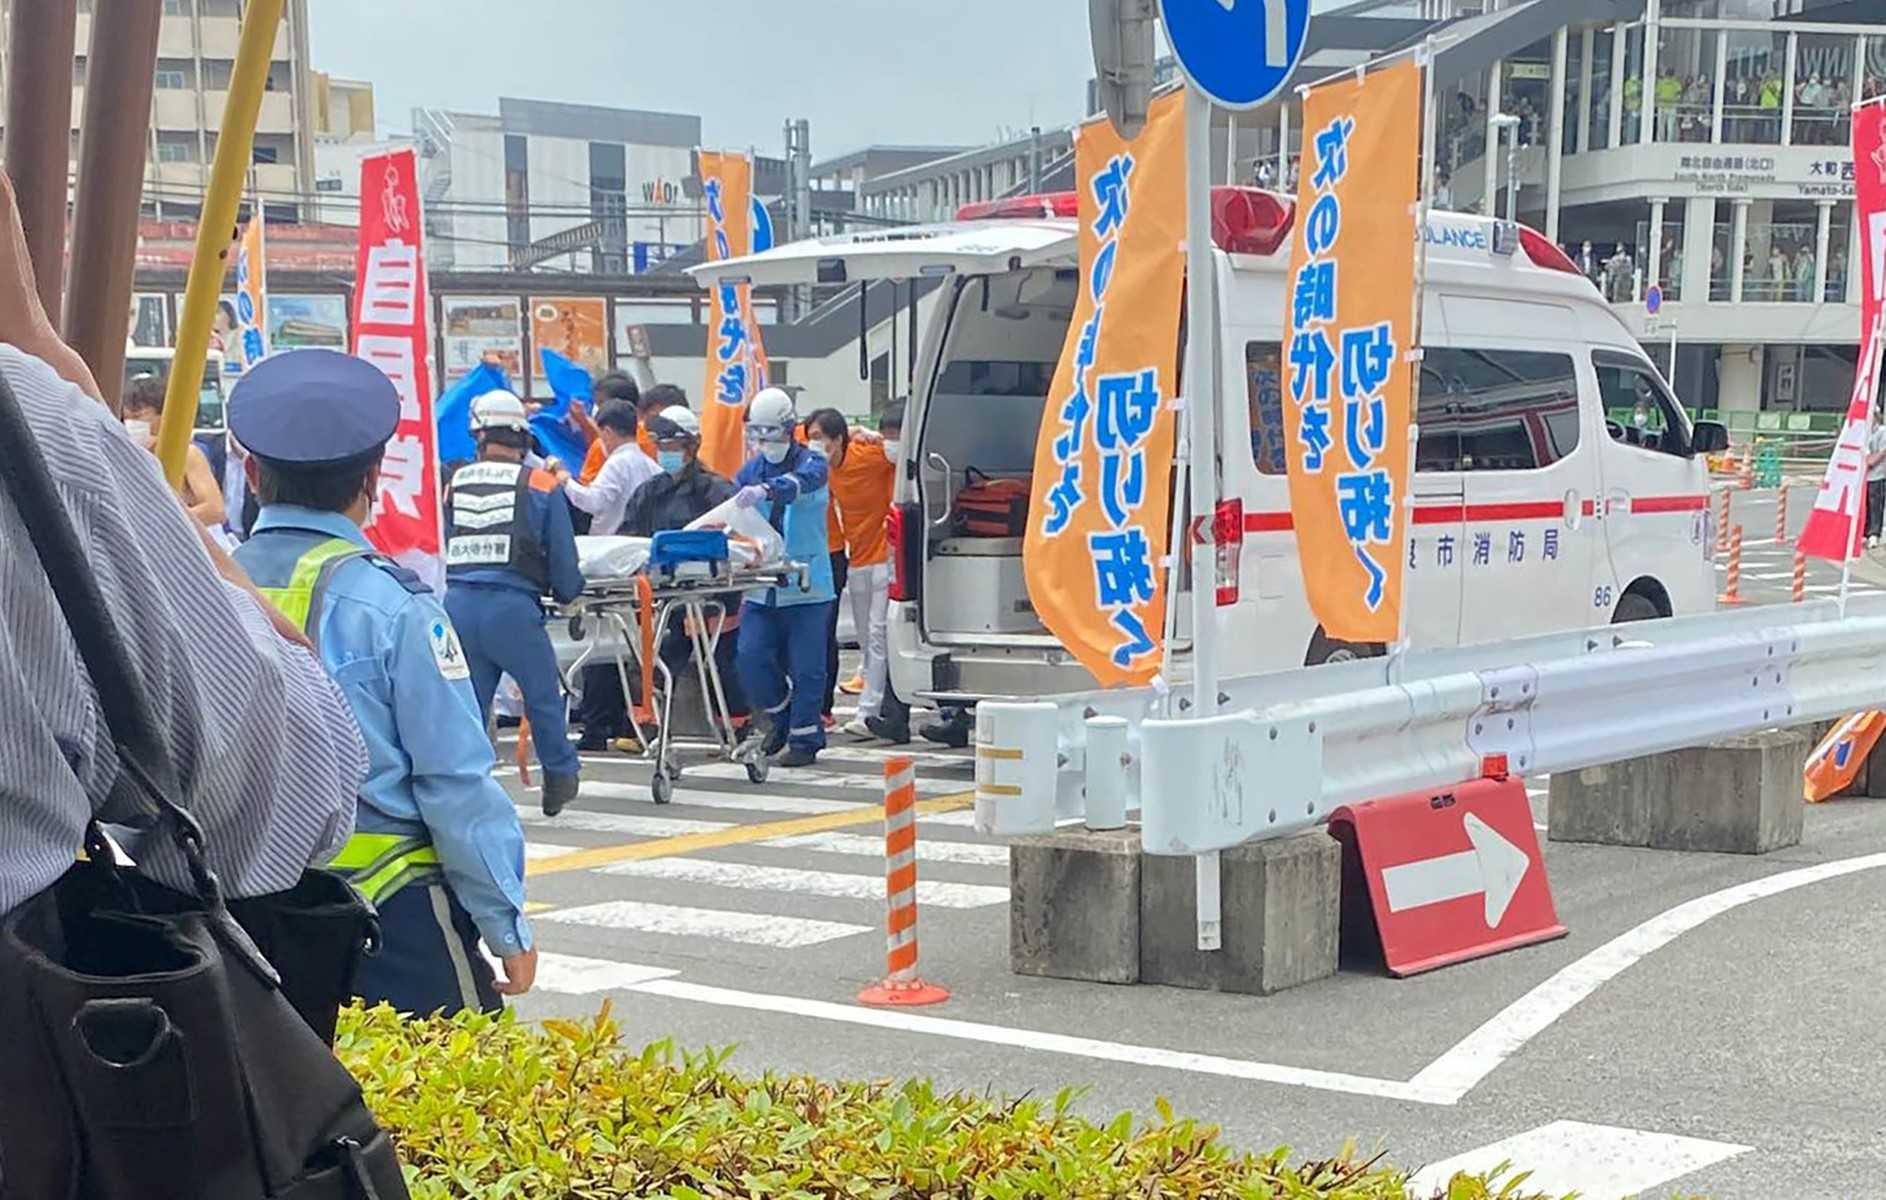 This handout picture provided to Jiji Press shows a general view of the scene after an attack on Japan's former prime minister Shinzo Abe at Kintetsu Yamato-Saidaiji station square in Nara on July 8. Photo: AFP 